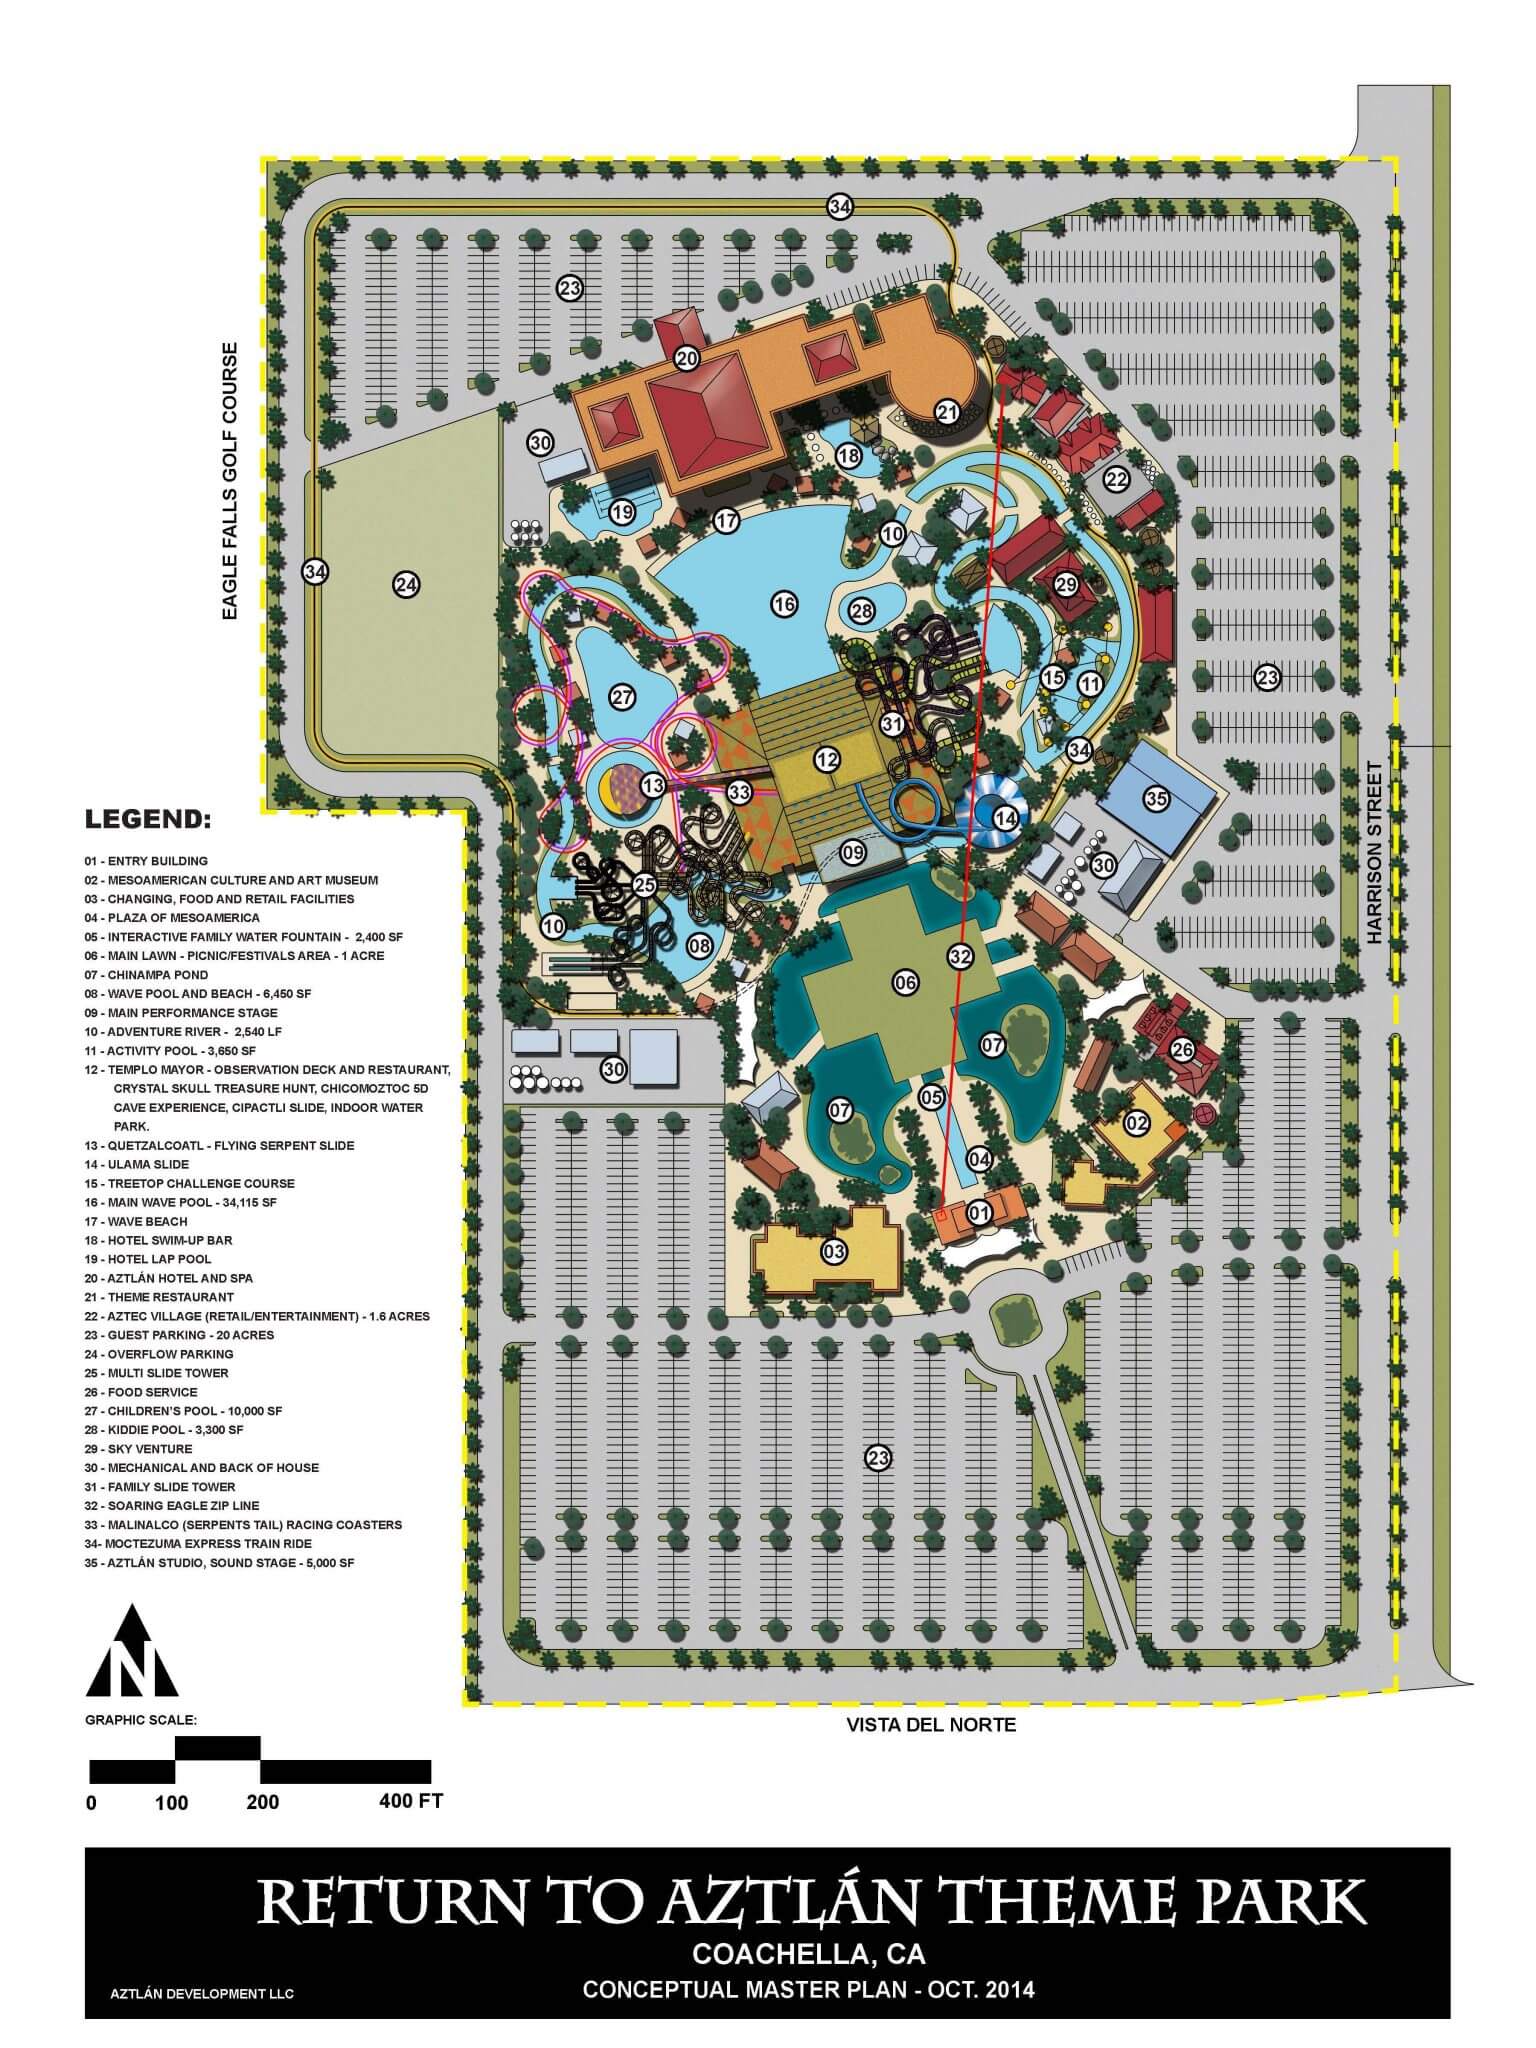 Site overview of Return to Aztlán